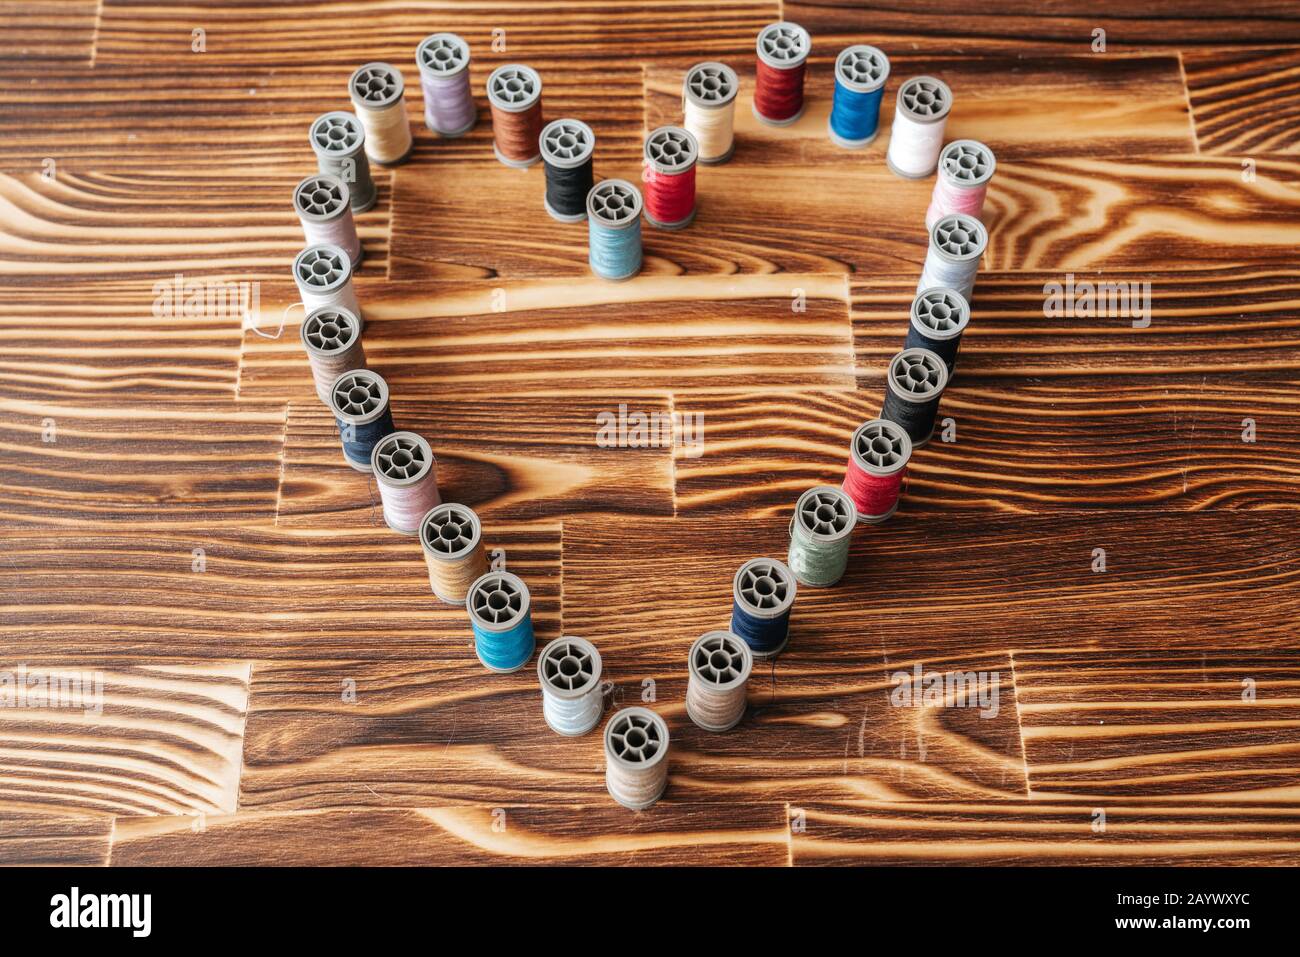 Many side by side aline thread spools in a heart shape on a wooden background Stock Photo